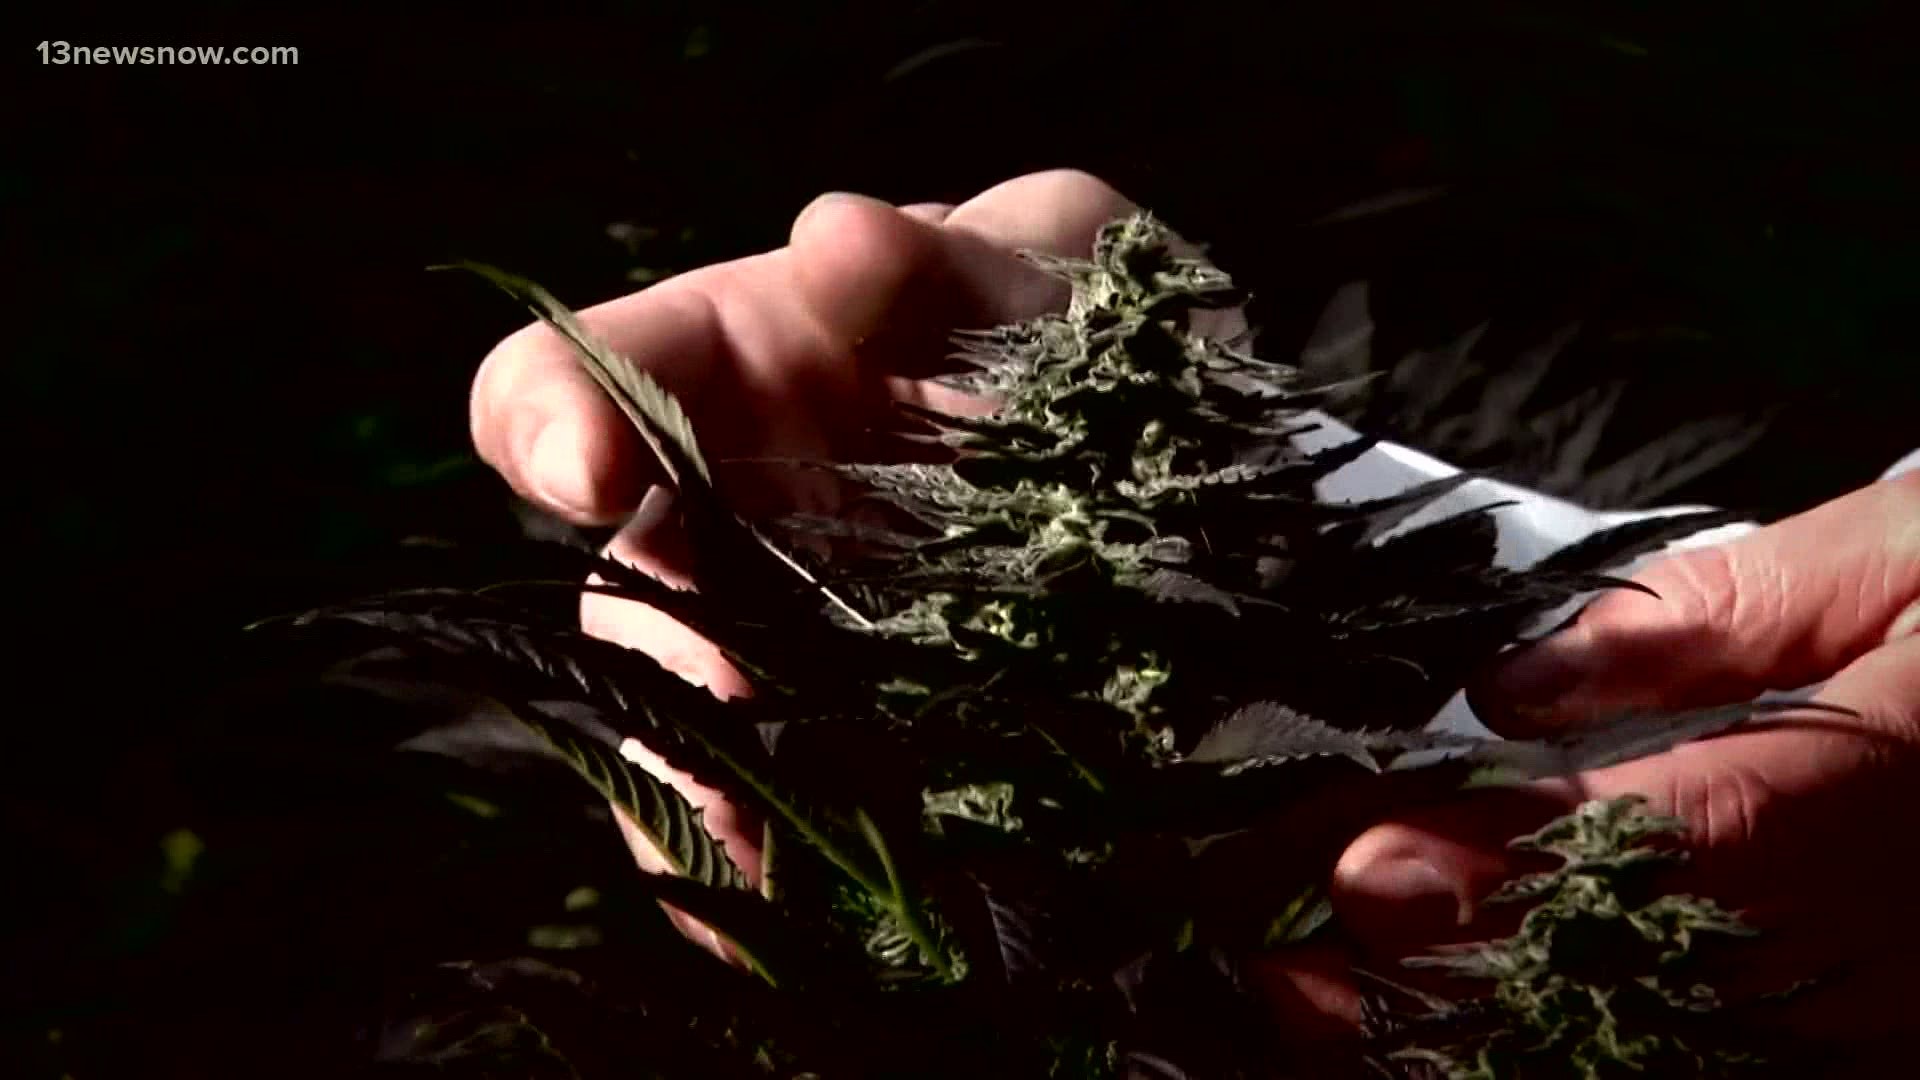 Virginia's marijuana laws ease up on July 1. The state is the first in the South to legalize possession of marijuana.